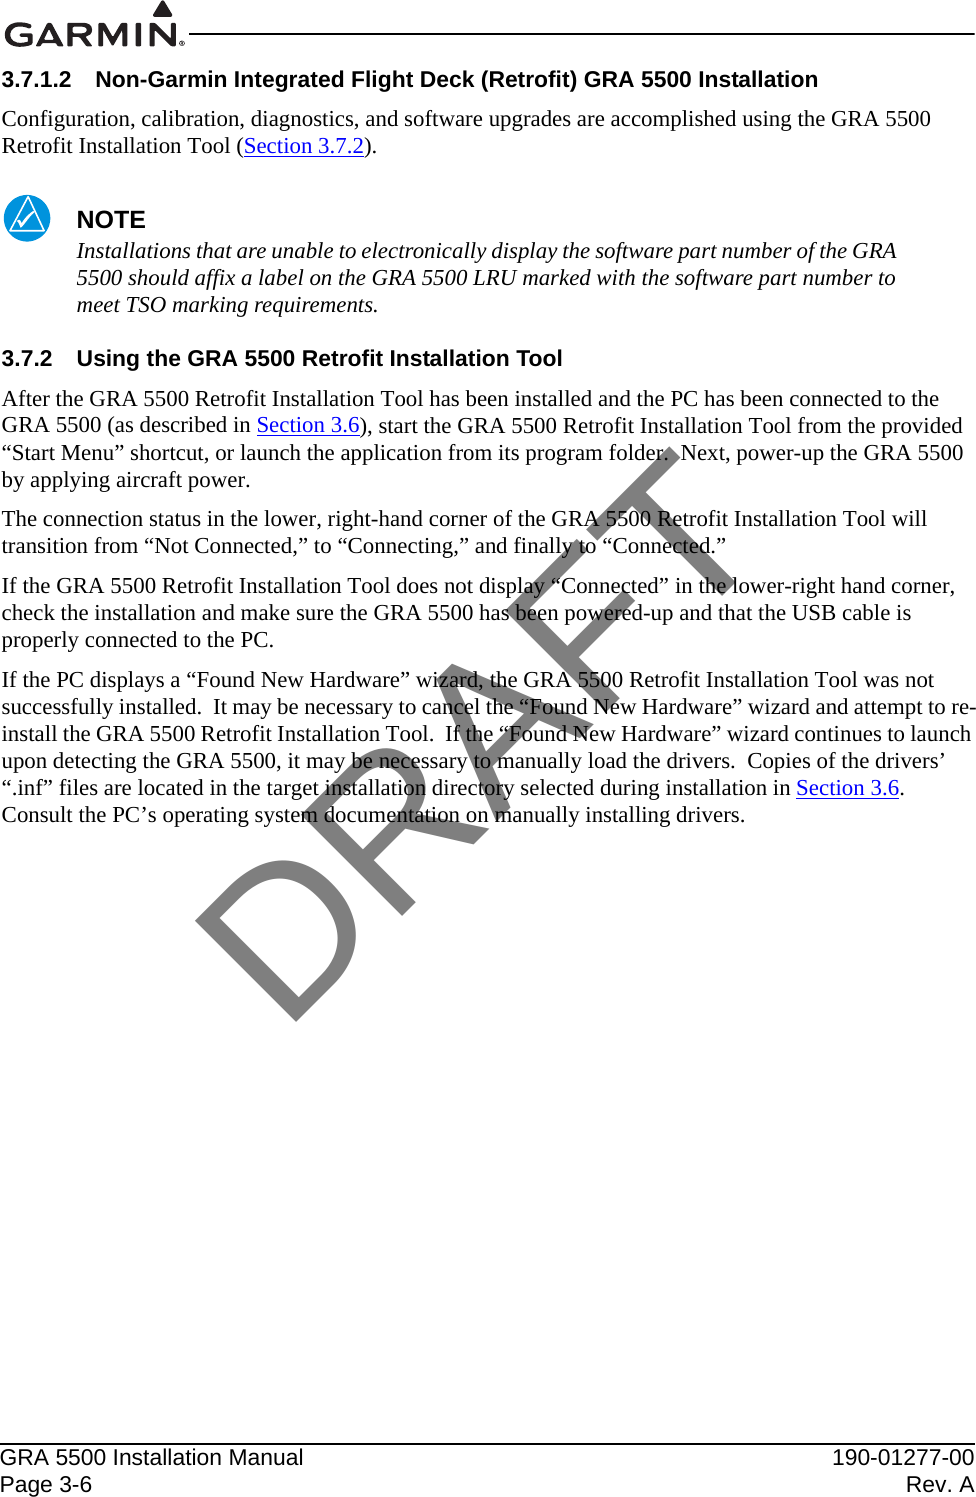 GRA 5500 Installation Manual 190-01277-00Page 3-6 Rev. A3.7.1.2 Non-Garmin Integrated Flight Deck (Retrofit) GRA 5500 InstallationConfiguration, calibration, diagnostics, and software upgrades are accomplished using the GRA 5500 Retrofit Installation Tool (Section 3.7.2).NOTEInstallations that are unable to electronically display the software part number of the GRA 5500 should affix a label on the GRA 5500 LRU marked with the software part number to meet TSO marking requirements.3.7.2 Using the GRA 5500 Retrofit Installation ToolAfter the GRA 5500 Retrofit Installation Tool has been installed and the PC has been connected to the GRA 5500 (as described in Section 3.6), start the GRA 5500 Retrofit Installation Tool from the provided “Start Menu” shortcut, or launch the application from its program folder.  Next, power-up the GRA 5500 by applying aircraft power.The connection status in the lower, right-hand corner of the GRA 5500 Retrofit Installation Tool will transition from “Not Connected,” to “Connecting,” and finally to “Connected.”If the GRA 5500 Retrofit Installation Tool does not display “Connected” in the lower-right hand corner, check the installation and make sure the GRA 5500 has been powered-up and that the USB cable is properly connected to the PC.If the PC displays a “Found New Hardware” wizard, the GRA 5500 Retrofit Installation Tool was not successfully installed.  It may be necessary to cancel the “Found New Hardware” wizard and attempt to re-install the GRA 5500 Retrofit Installation Tool.  If the “Found New Hardware” wizard continues to launch upon detecting the GRA 5500, it may be necessary to manually load the drivers.  Copies of the drivers’ “.inf” files are located in the target installation directory selected during installation in Section 3.6.  Consult the PC’s operating system documentation on manually installing drivers.DRAFT